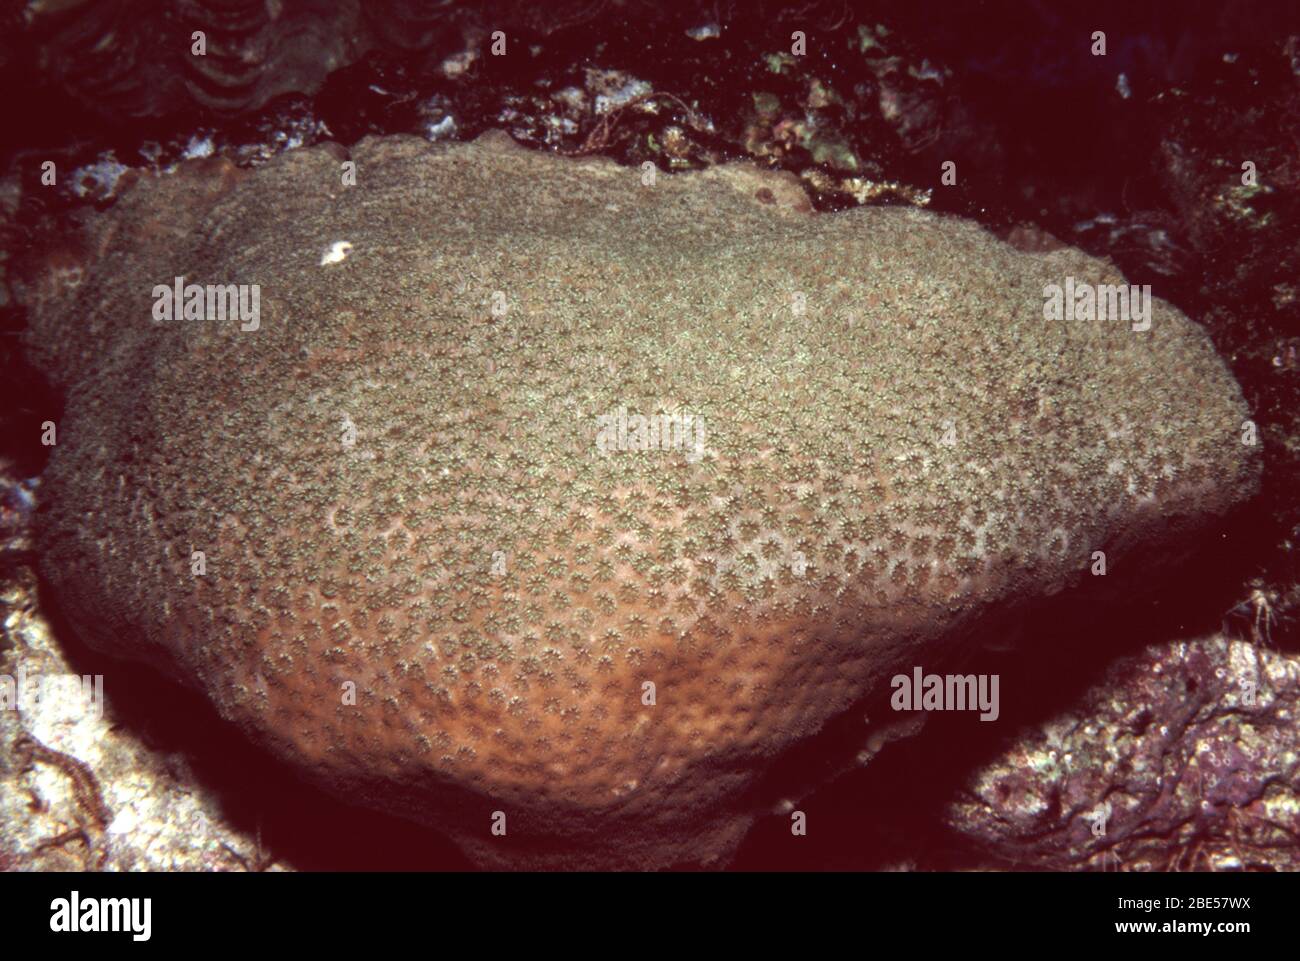 Pebble coral, Astreopora sp. Stock Photo